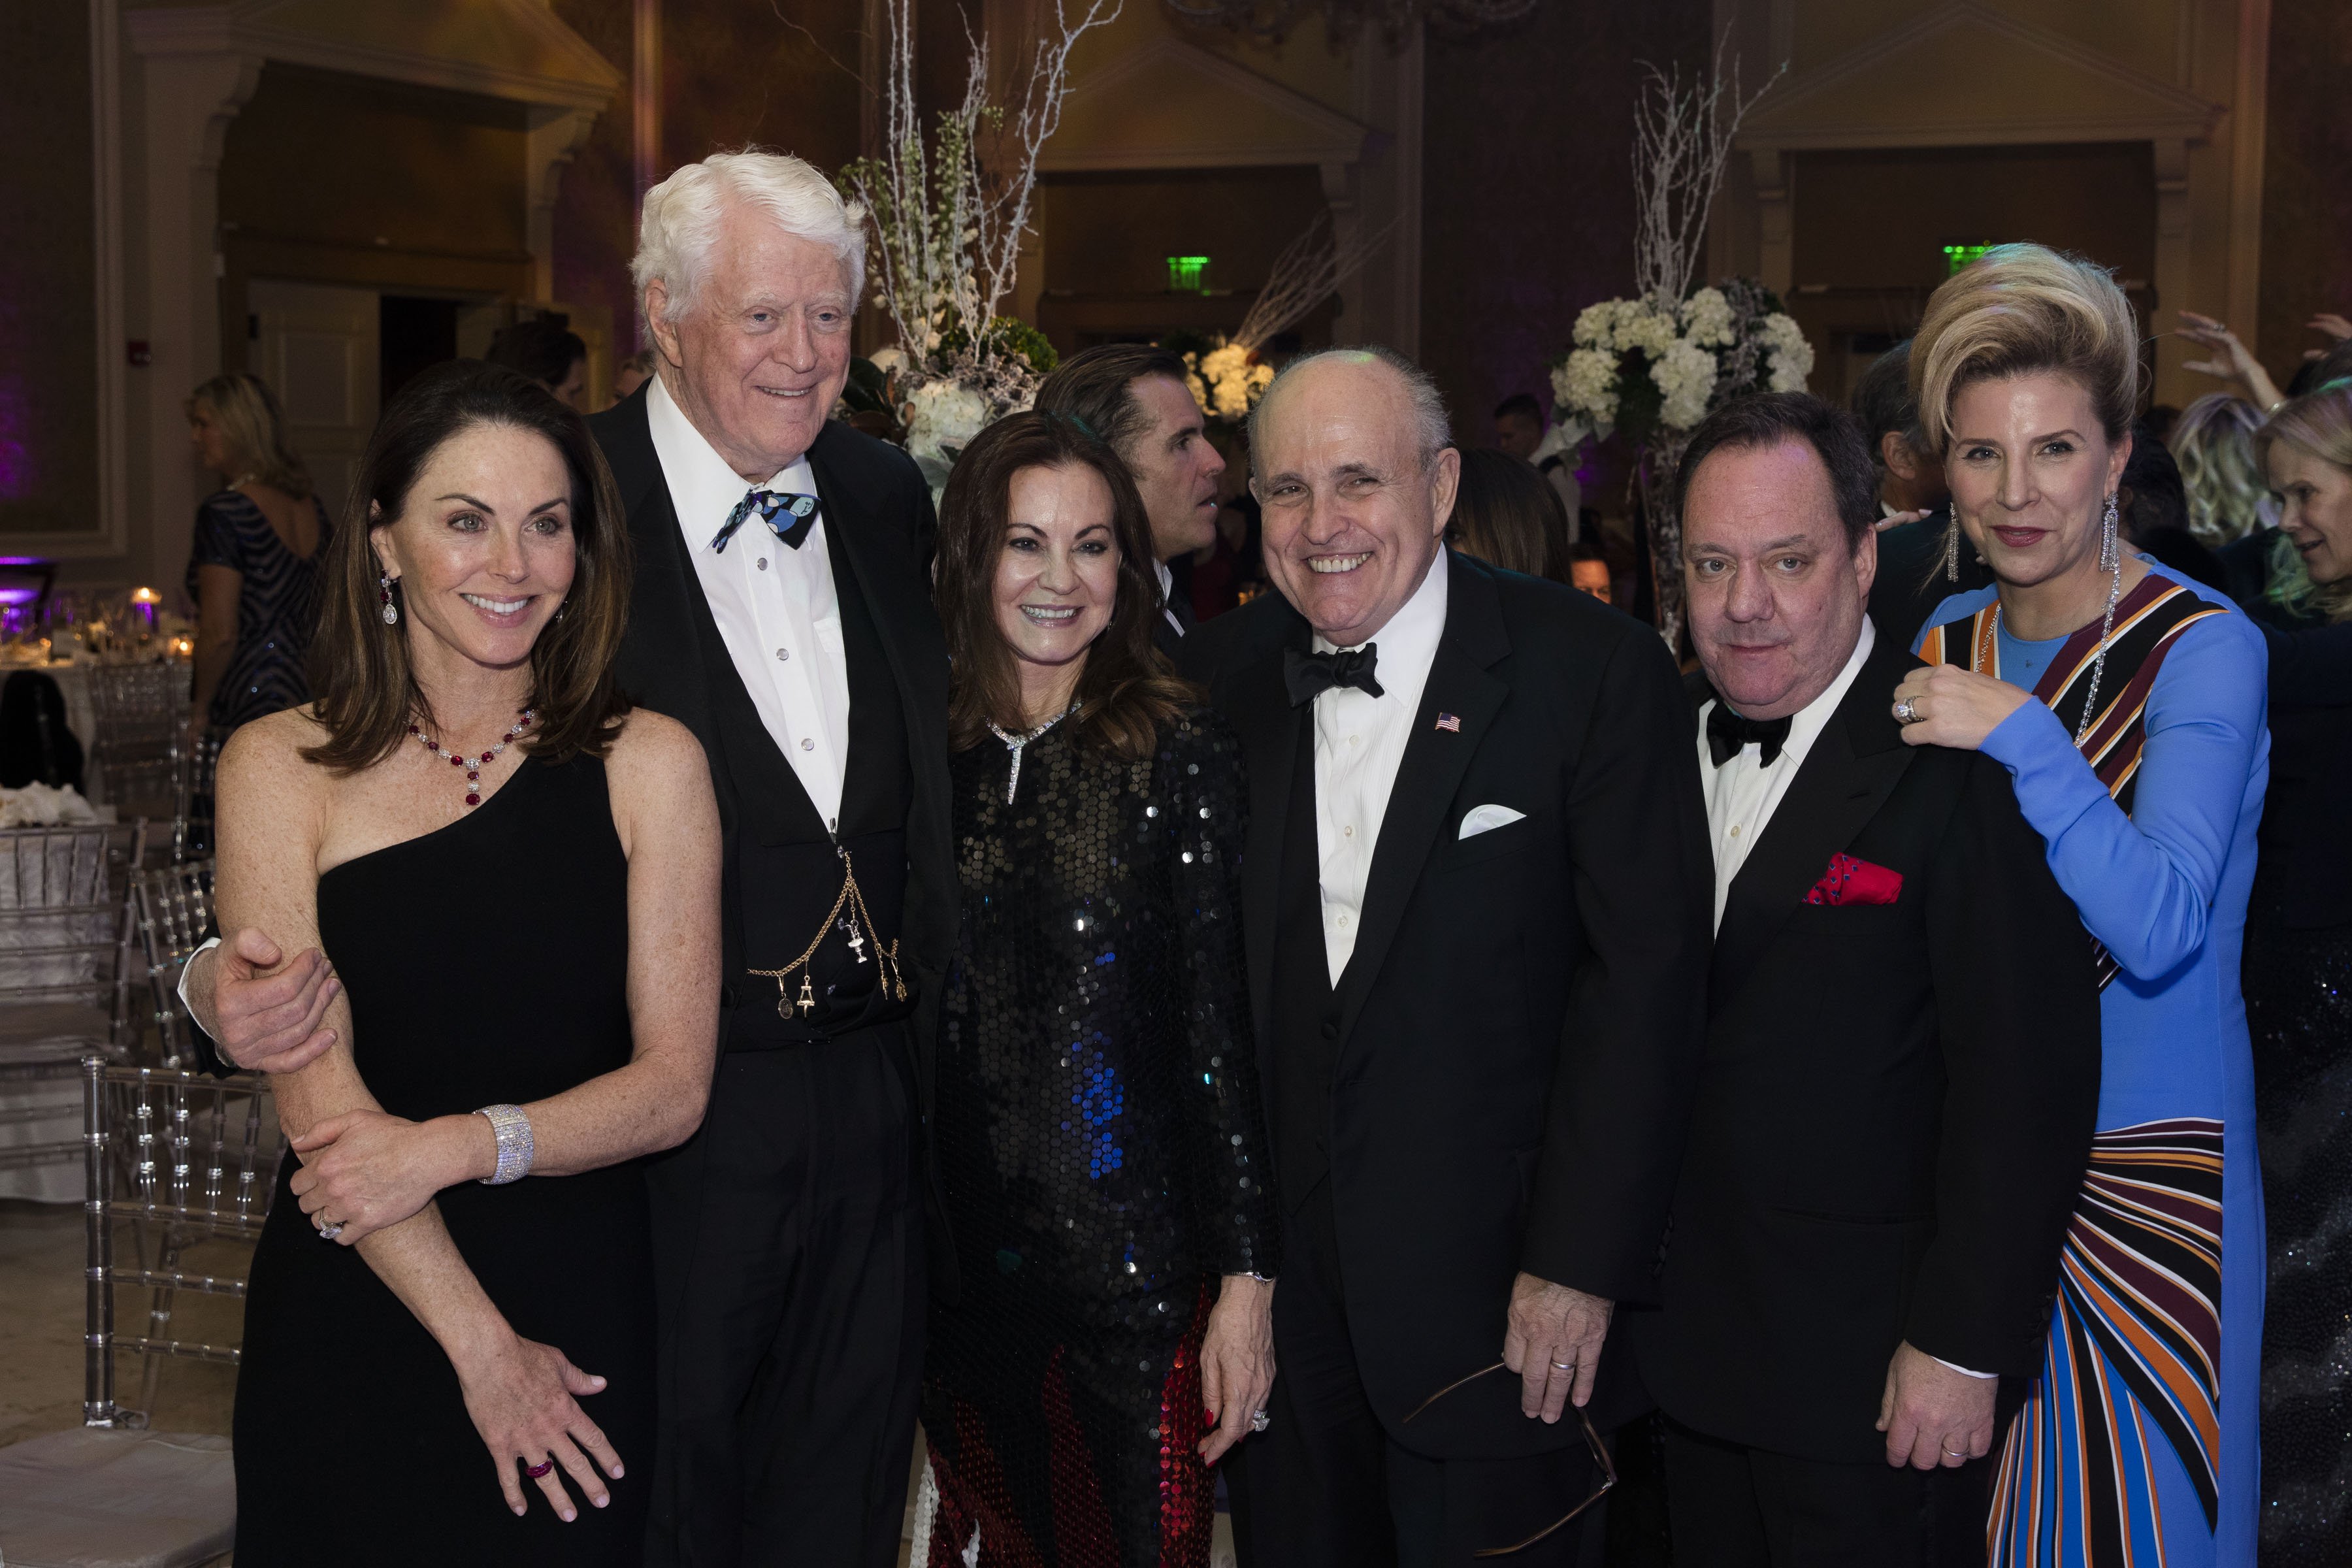 (L-R) Bridget Koch, Bill Koch, Judith Giuliani, Rudy Giuliani, James L. Nederlander and Margo Nederlander attend Boys and Girls Clubs of Palm Beach County Celebrate the 36th Annual Winter Ball at The Breakers on February 3, 2017, in Palm Beach, FL. | Source: Getty Images